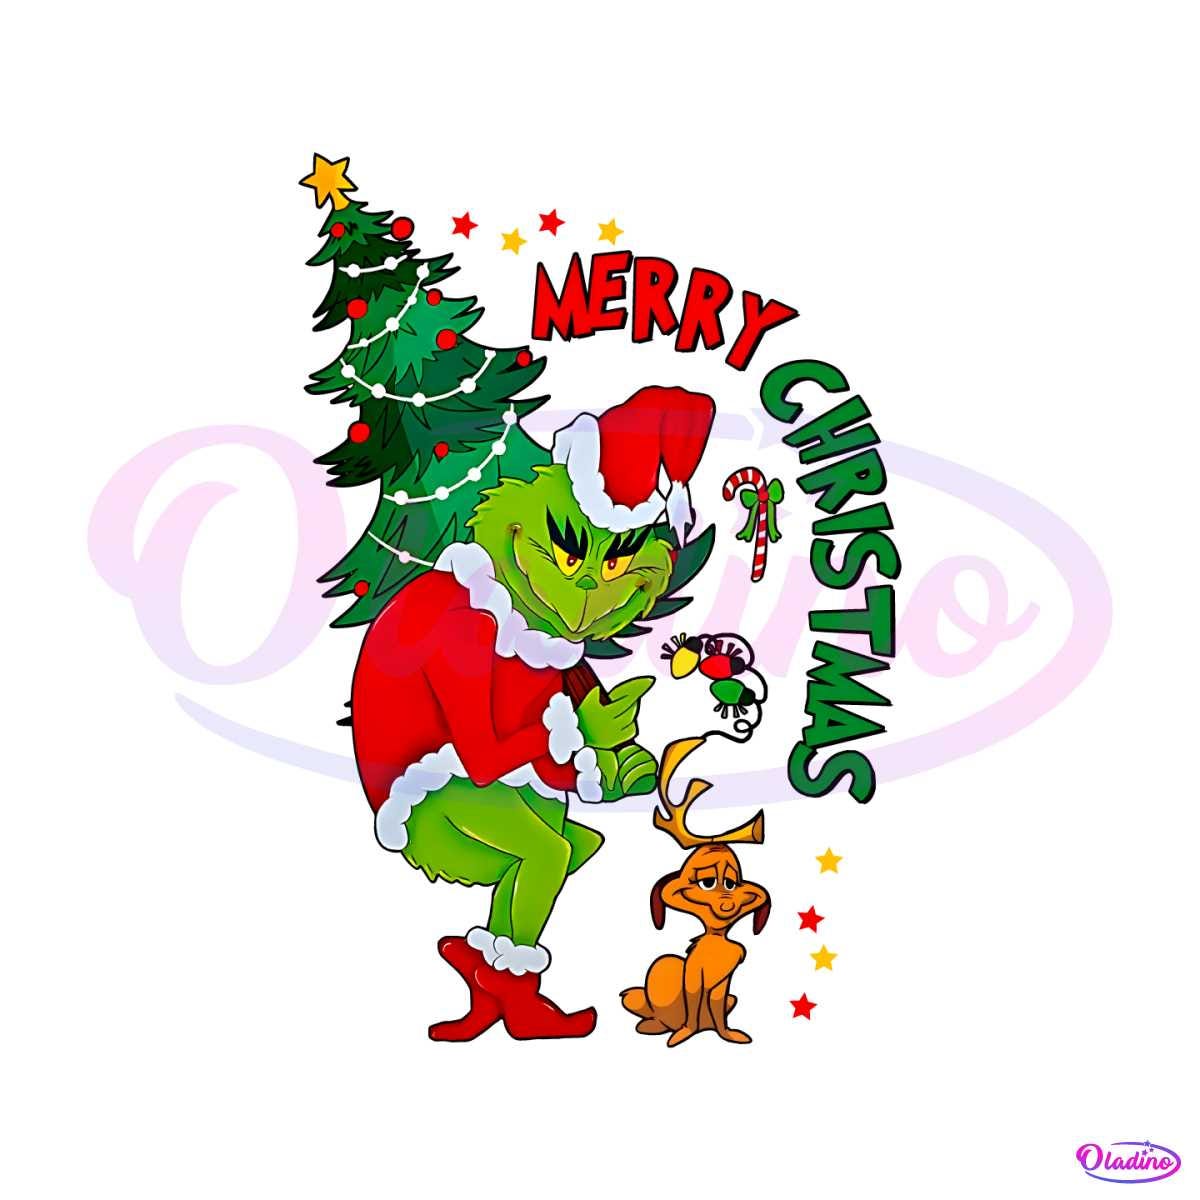 Thats It Im Not Going Grinch Max SVG